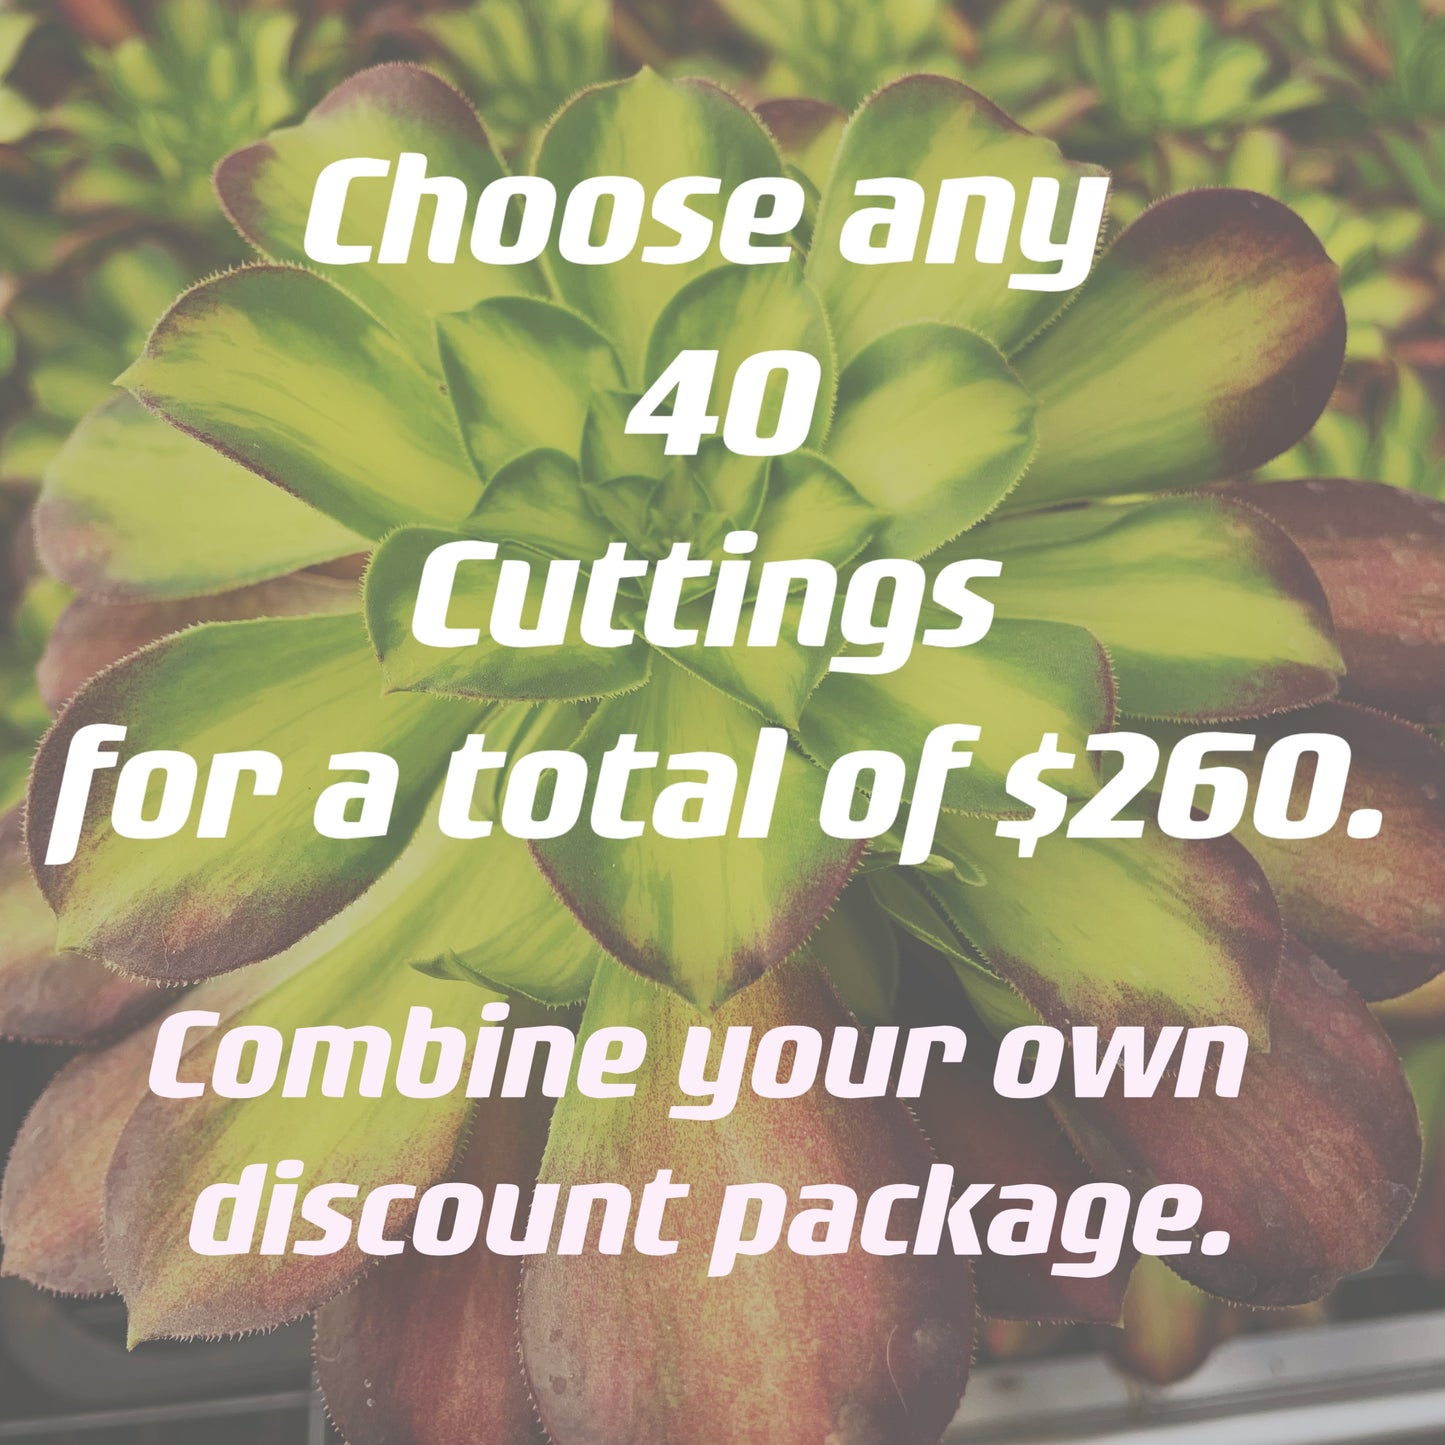 Sale！！！Choose any 40 cuttings for a total of $260.Combine your owndiscount package.